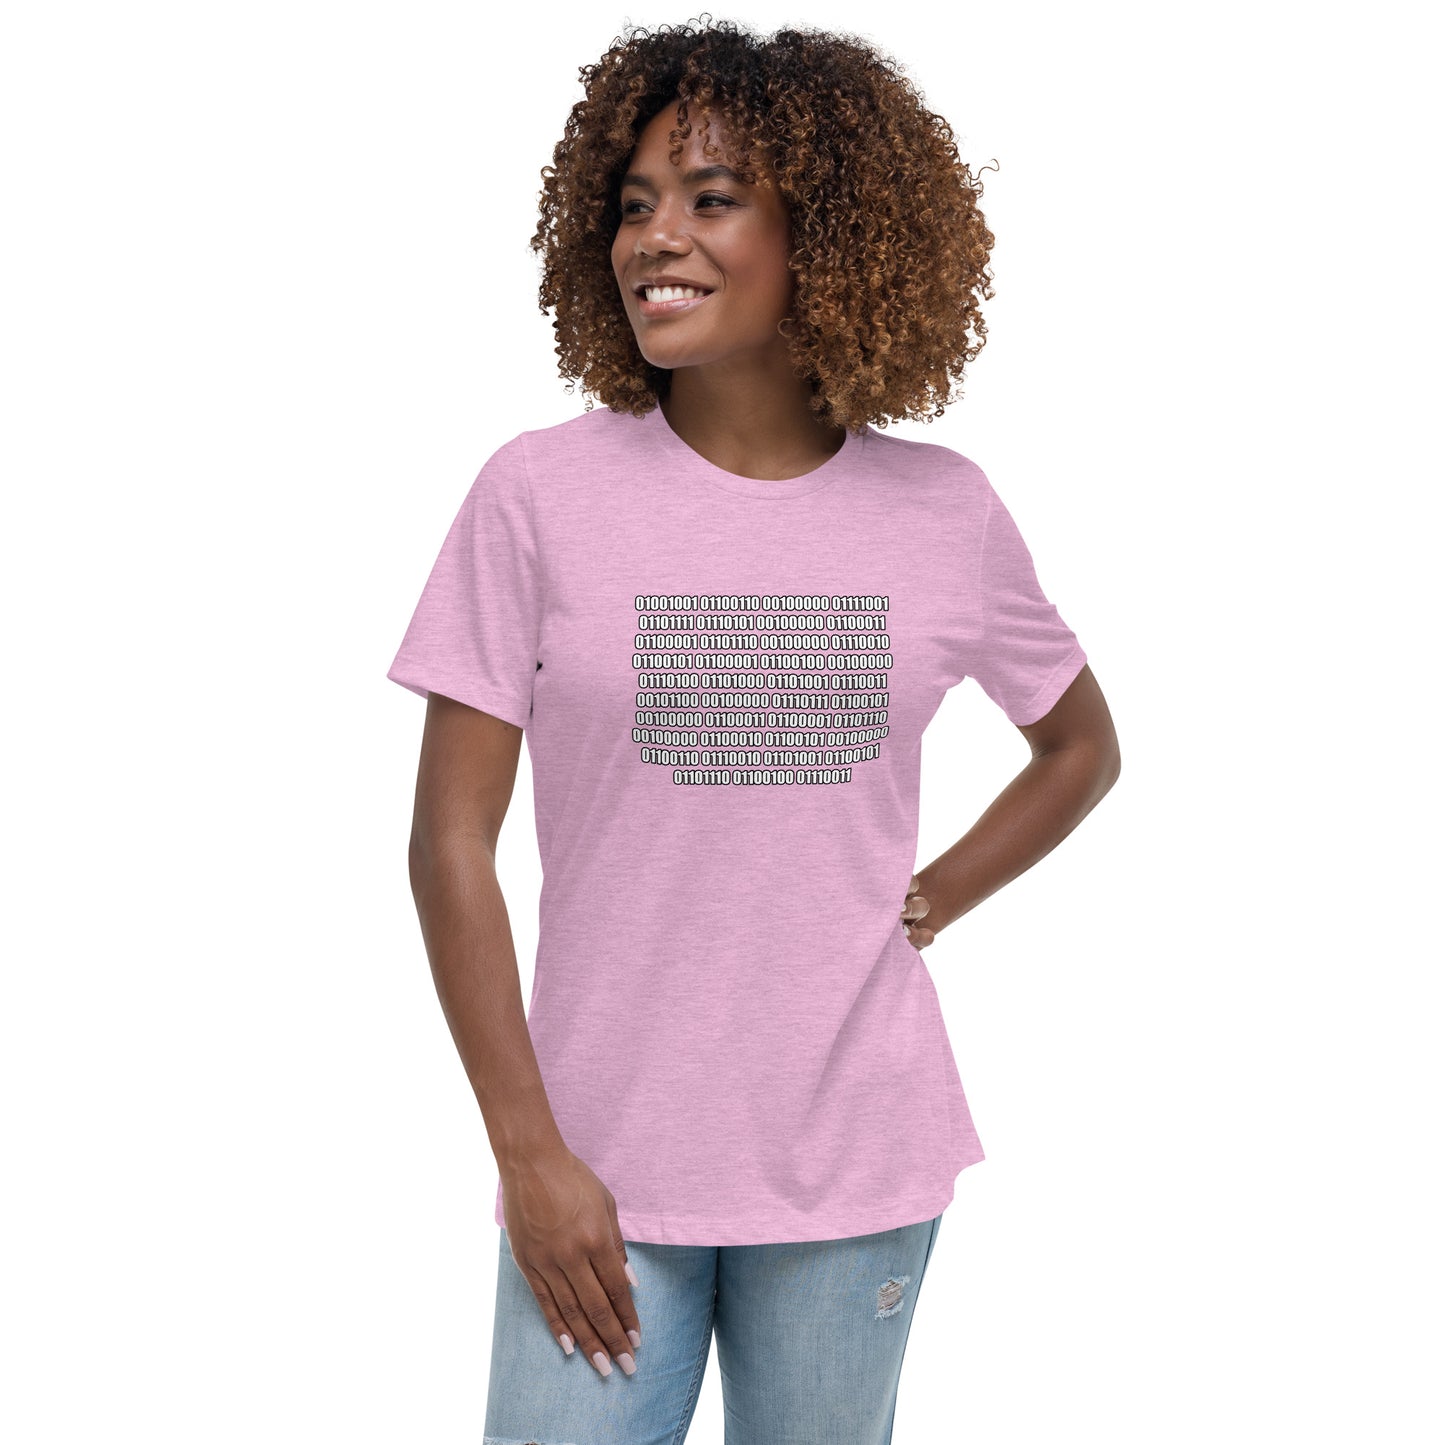 Woman with lilac t-shirt with binary code "If you can read this"